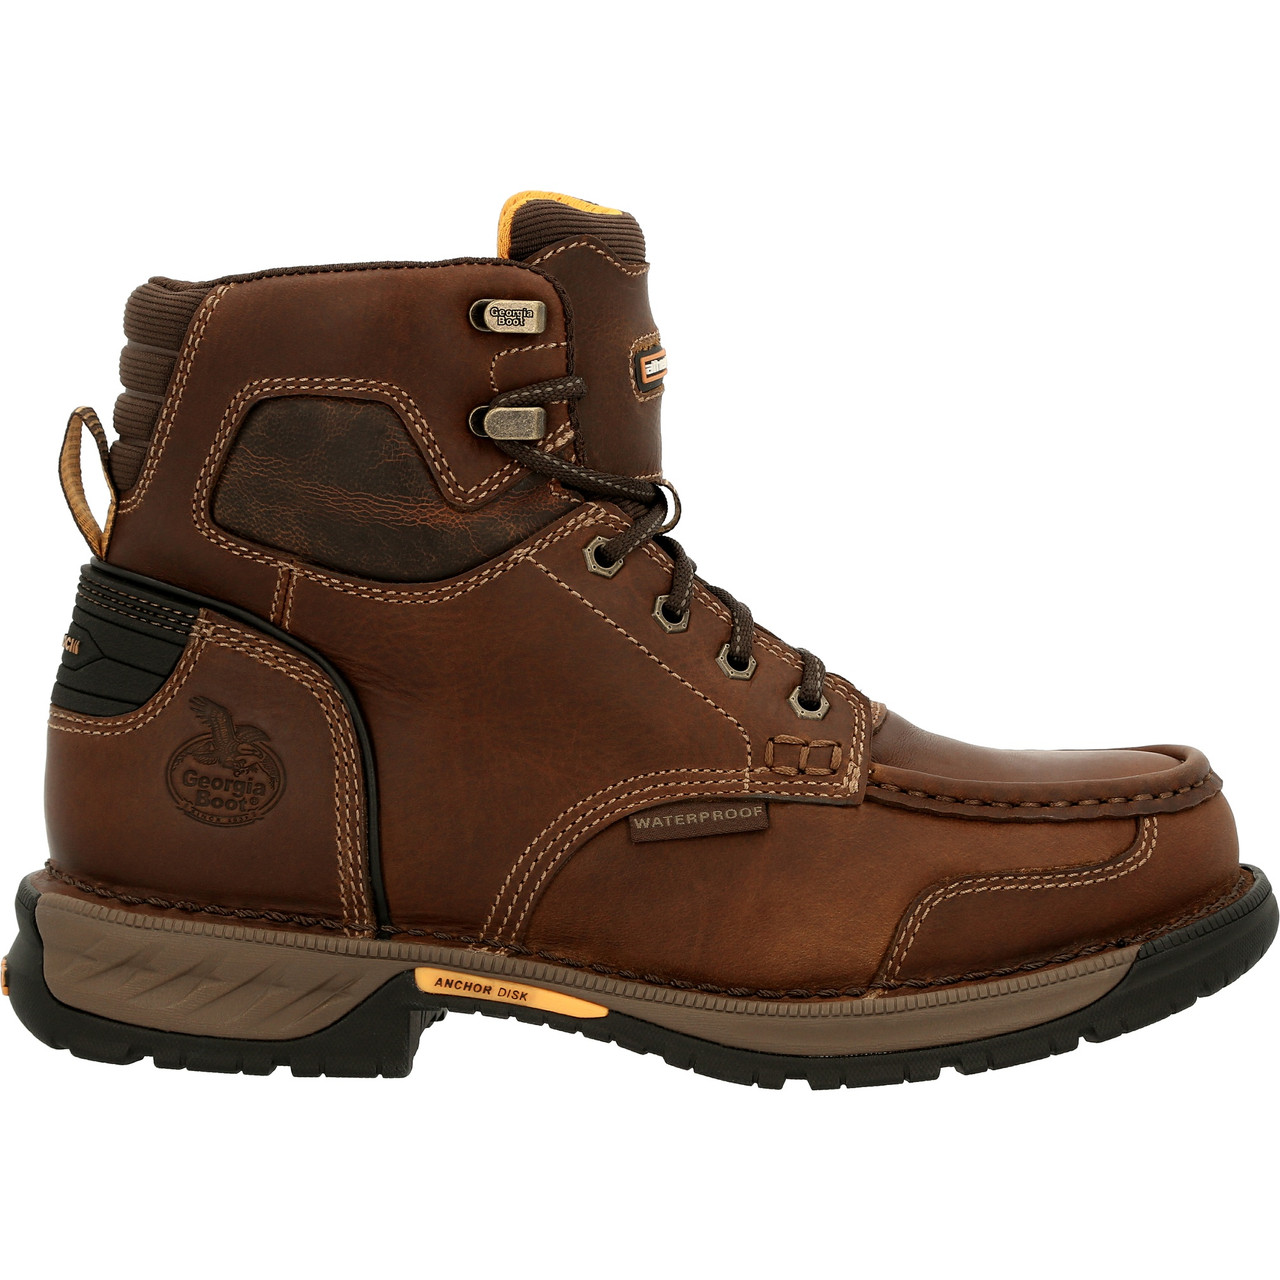 GEORGIA ATHENS 360 6" WATERPROOF WORK BOOTS GB00439 - ALL SIZES